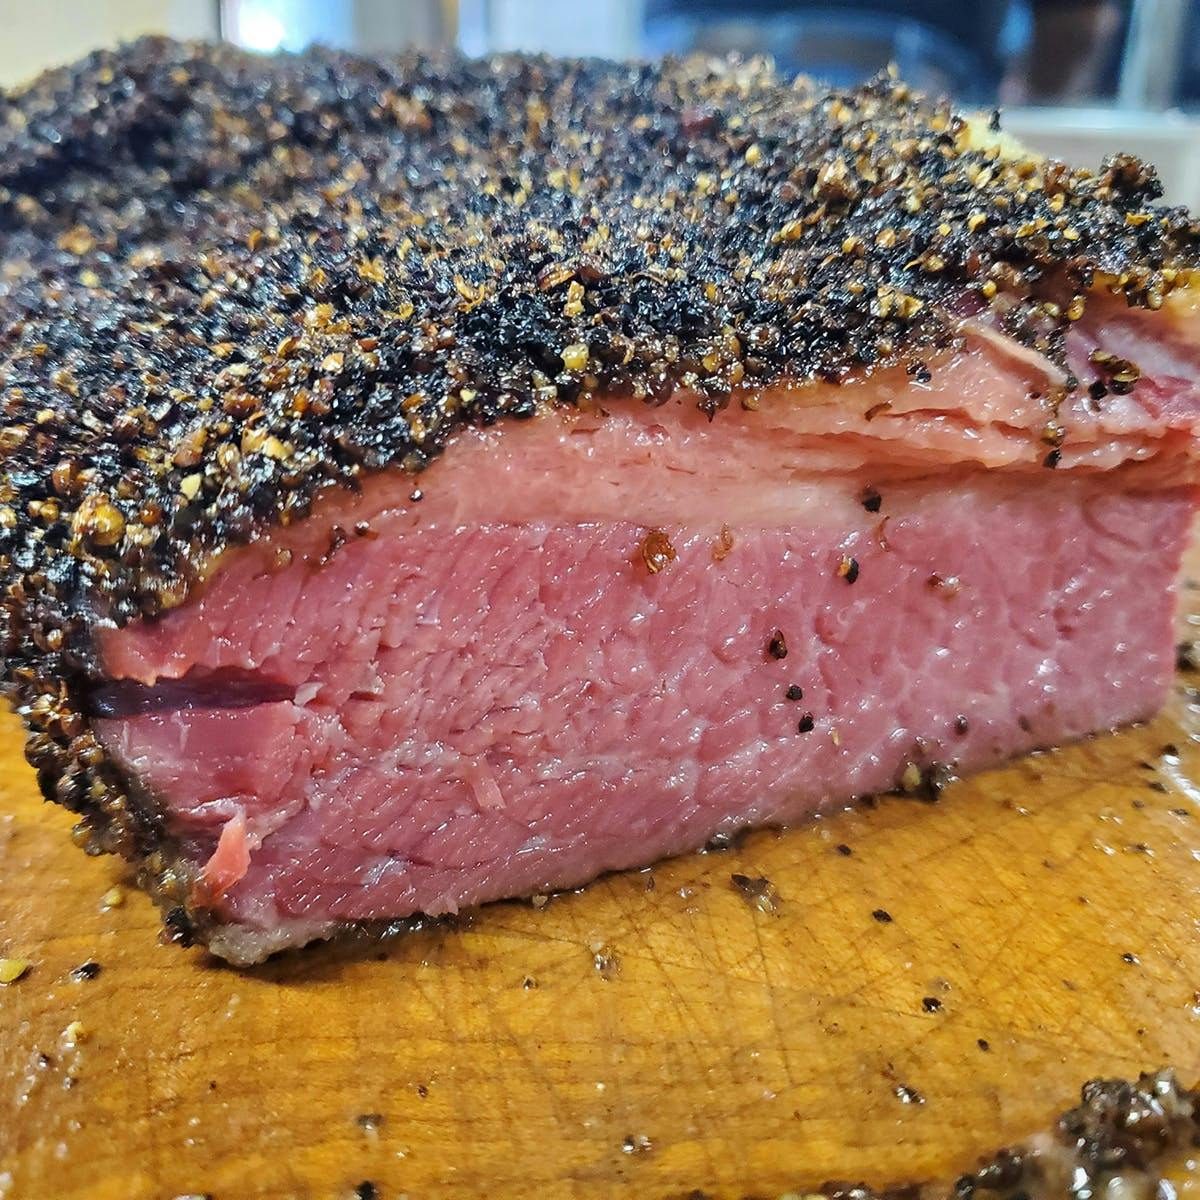 Whole Pastrami Brisket - 6 lbs. by Roegels Barbecue - Goldbelly